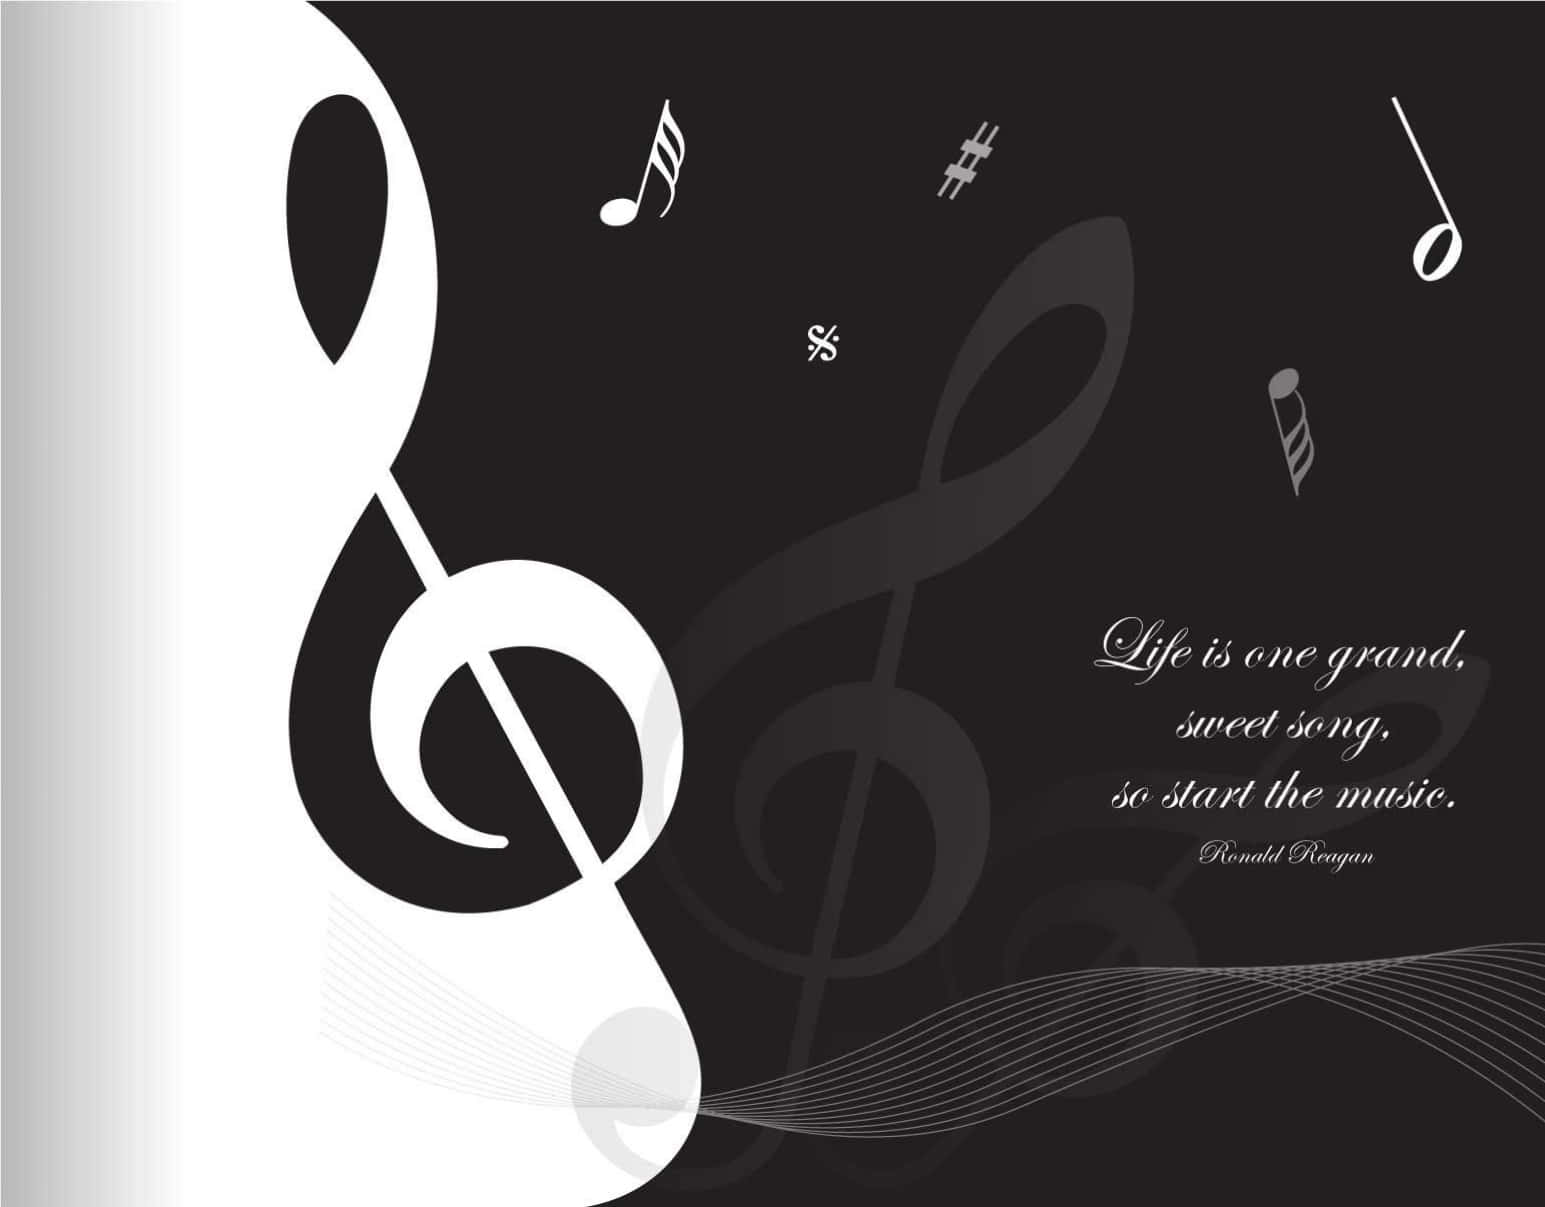 “Music is the language of the soul.” Wallpaper